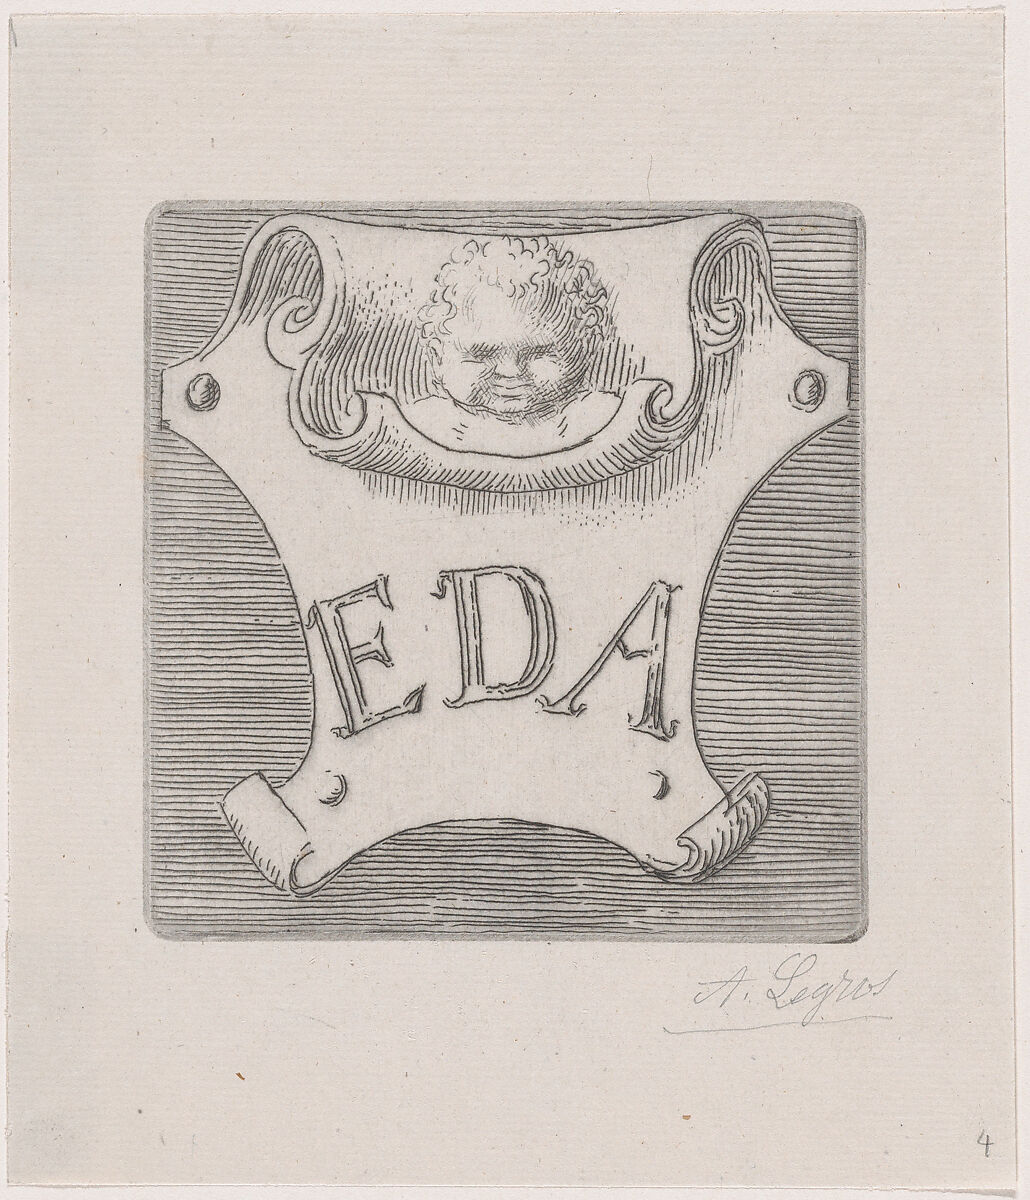 Counterproof of an impression from a name plate for Edward D. Adams, Alphonse Legros (French, Dijon 1837–1911 Watford, Hertfordshire), Counterproof of an etching 